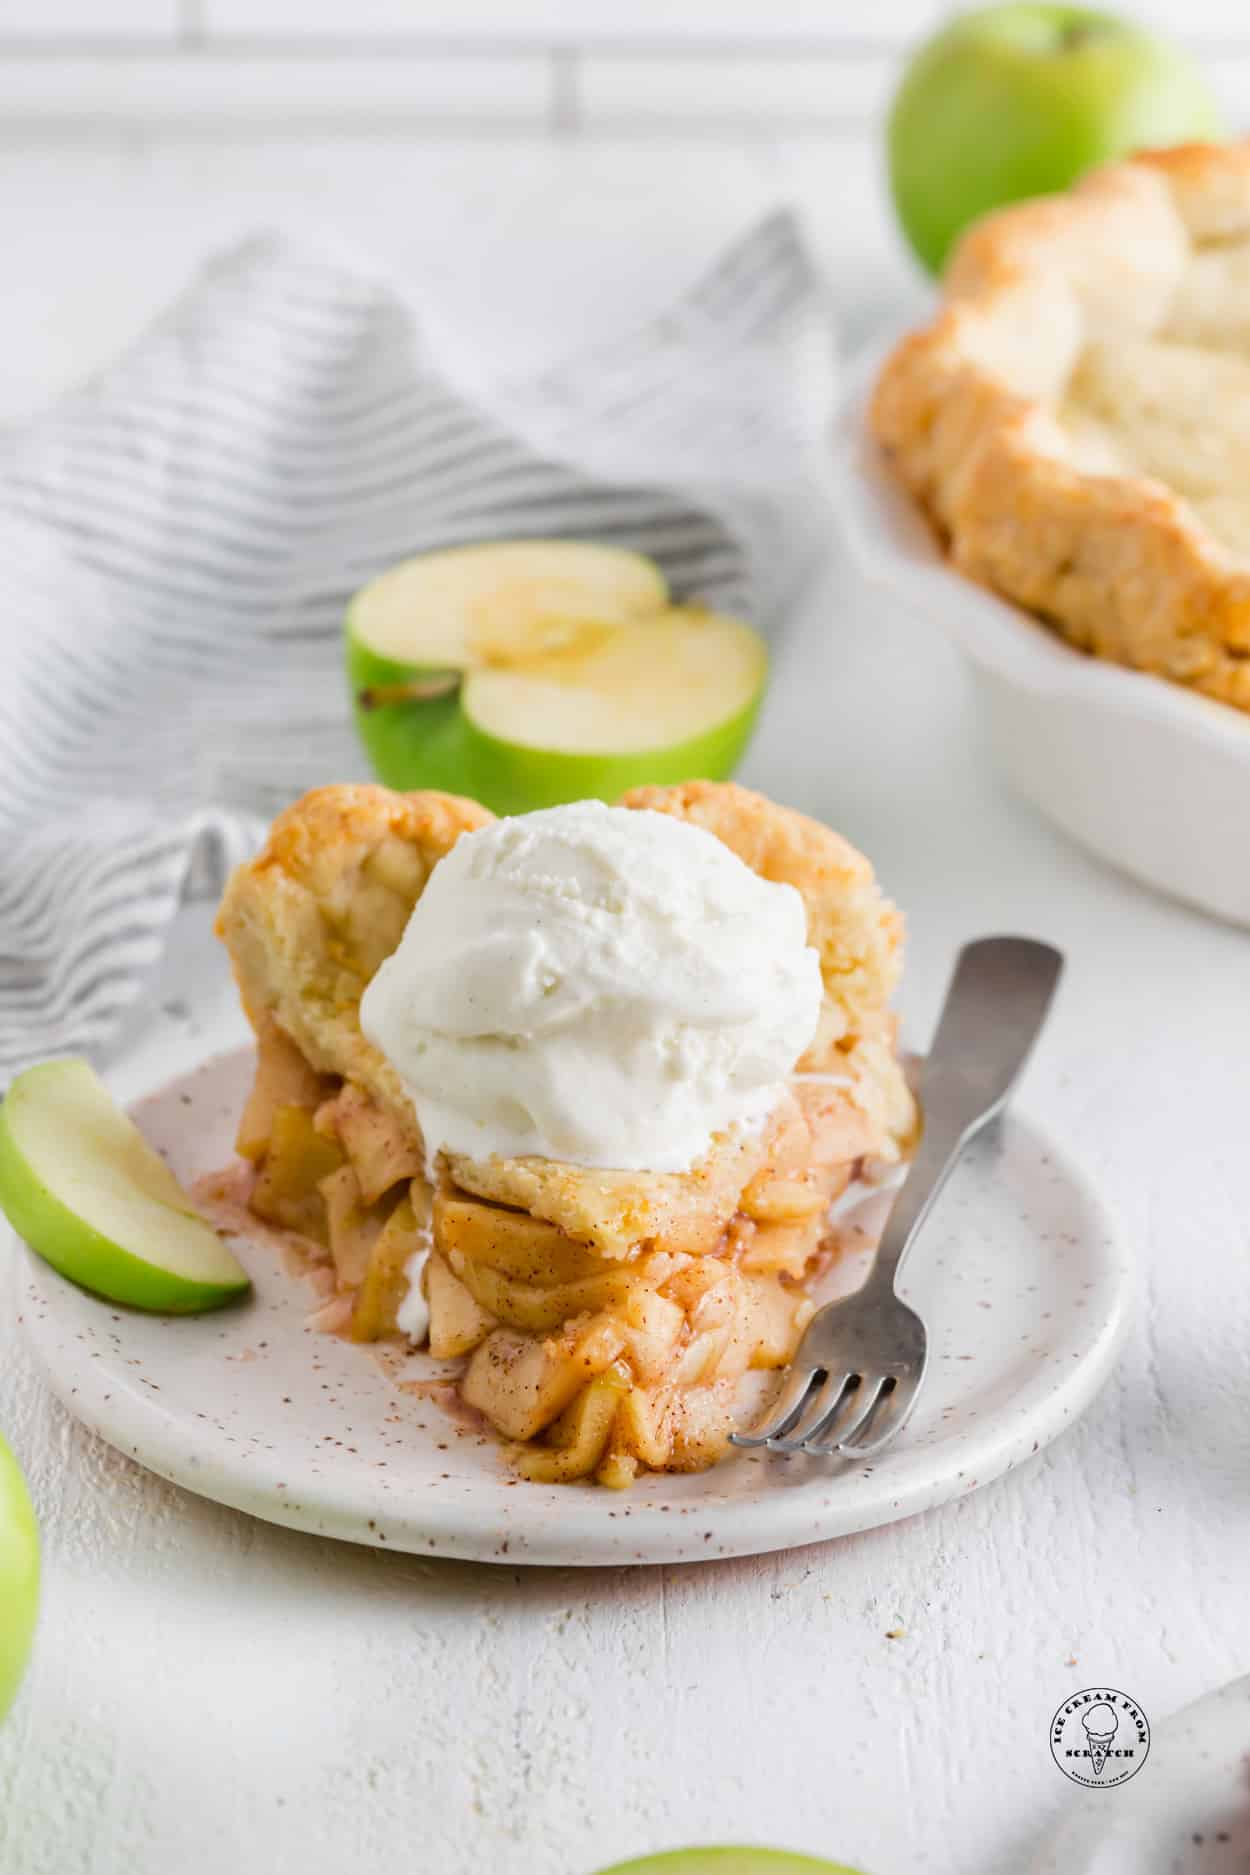 a thick slice of homemade apple pie with a scoop of vanilla ice cream on top. A fork and a slice of green apple are on the plate.